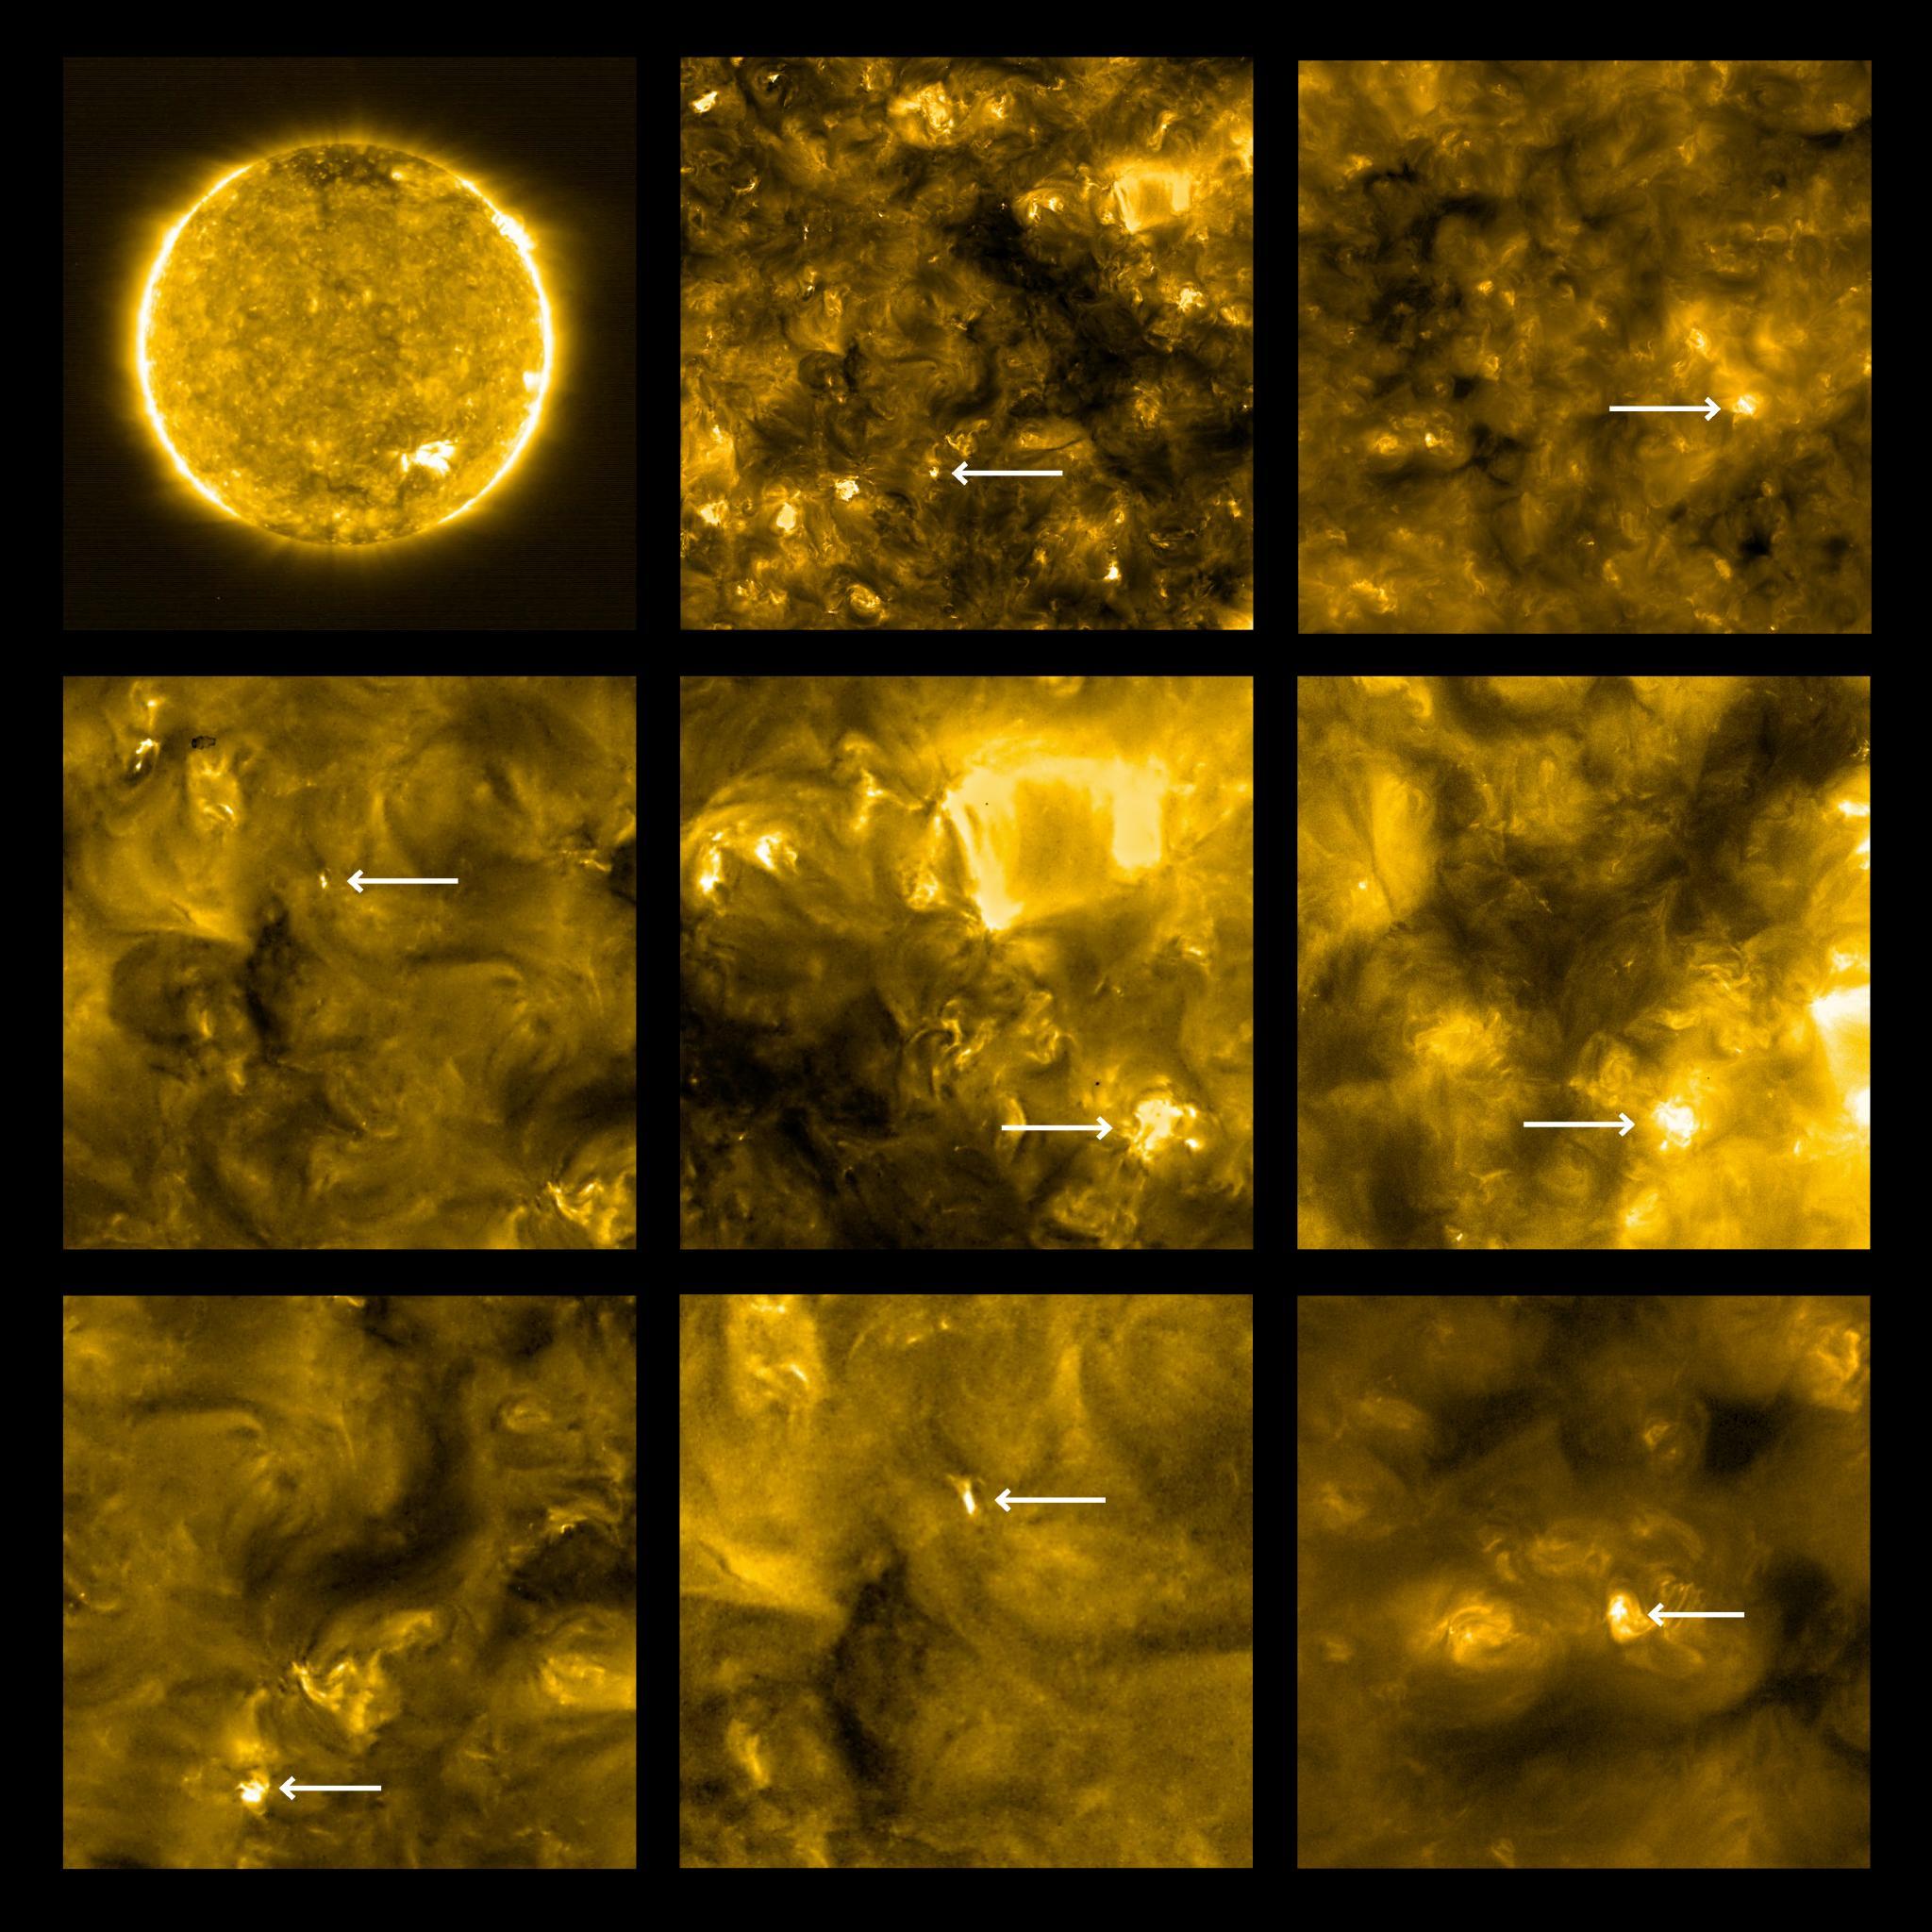 Nine extreme-ultraviolet images of the Sun are arranged in a 3 by 3 mosaic. The top left image shows the full disk of the Sun, and the other eight images show closeups of the Sun. In each of the eight closeup images, a white arrow points to a bright region on the Sun.